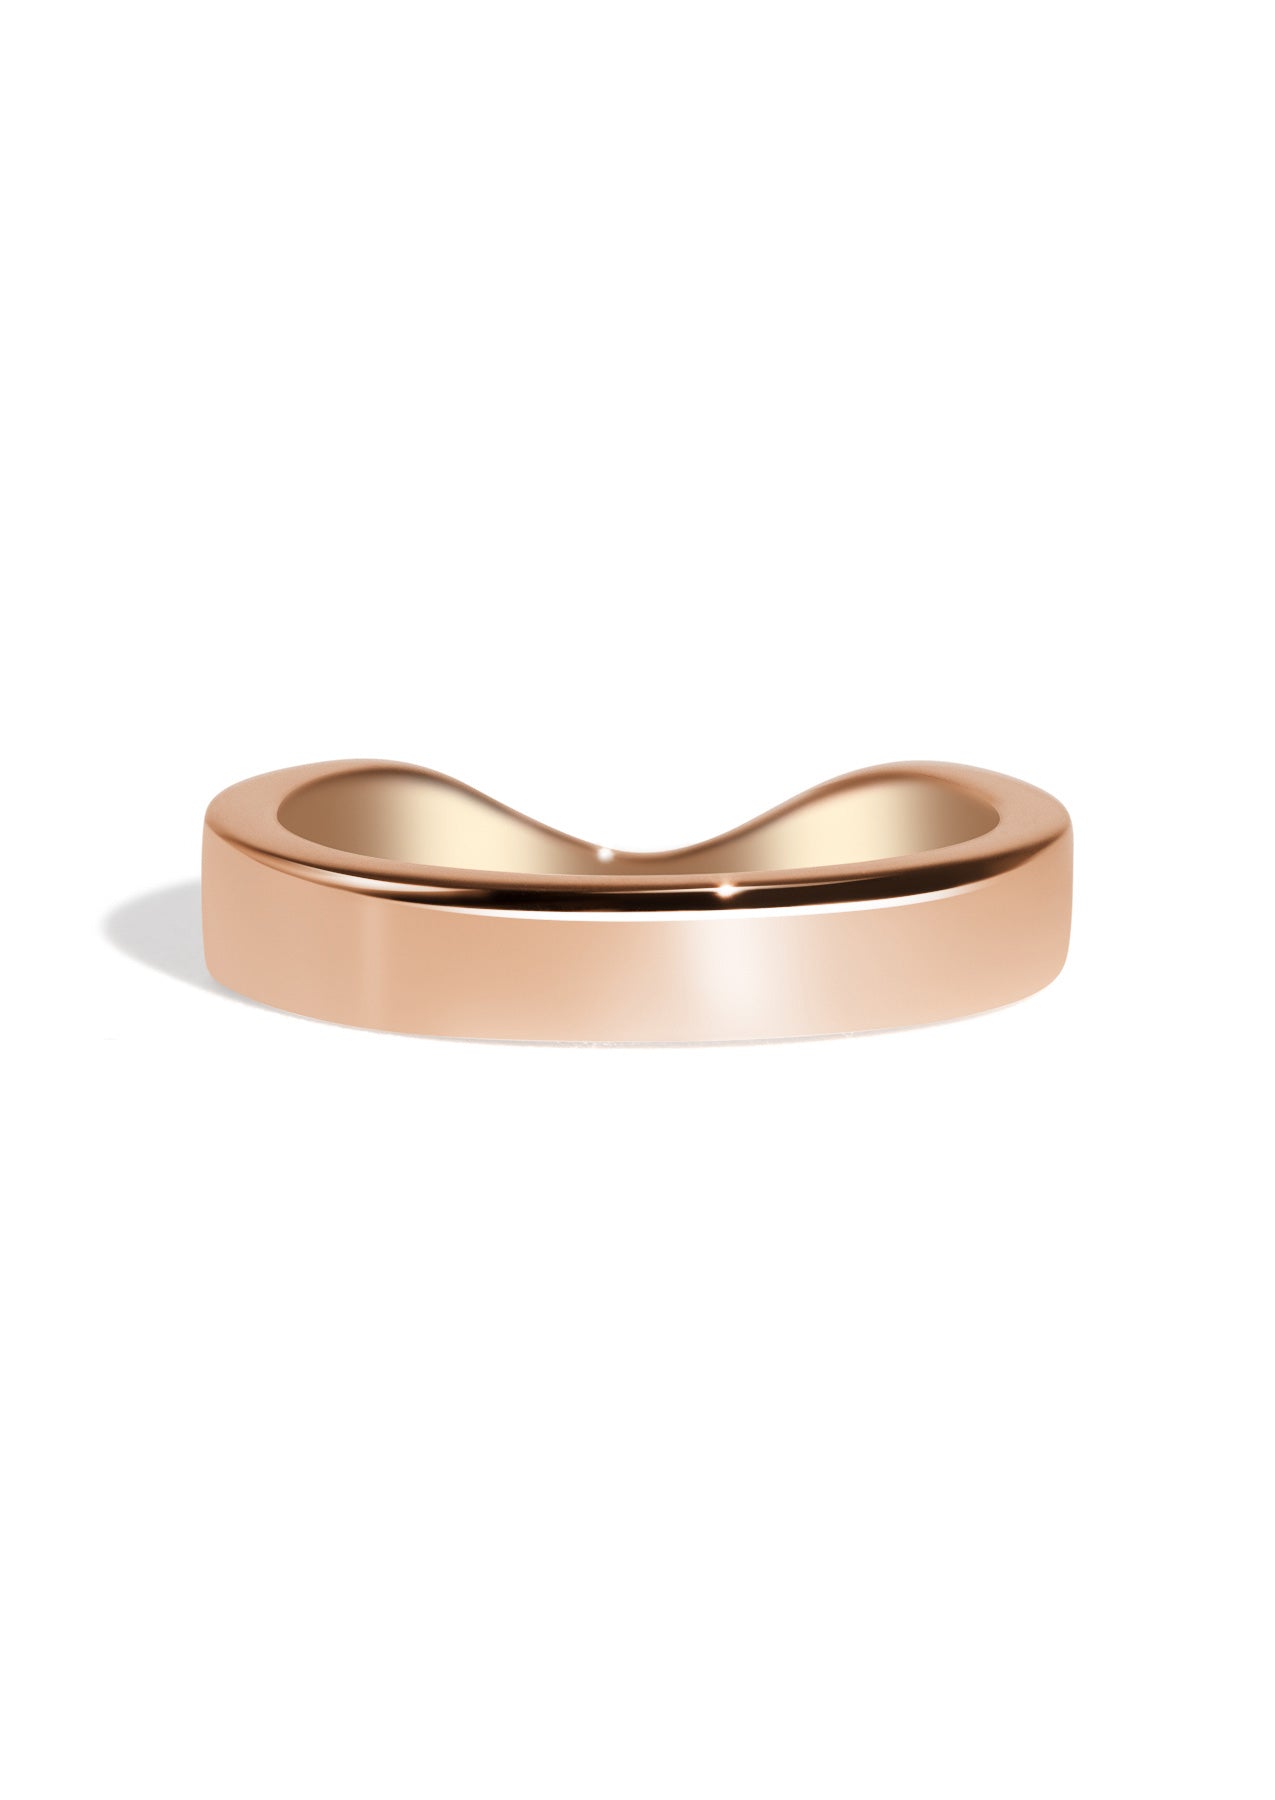 The Swoop Rose Gold Band